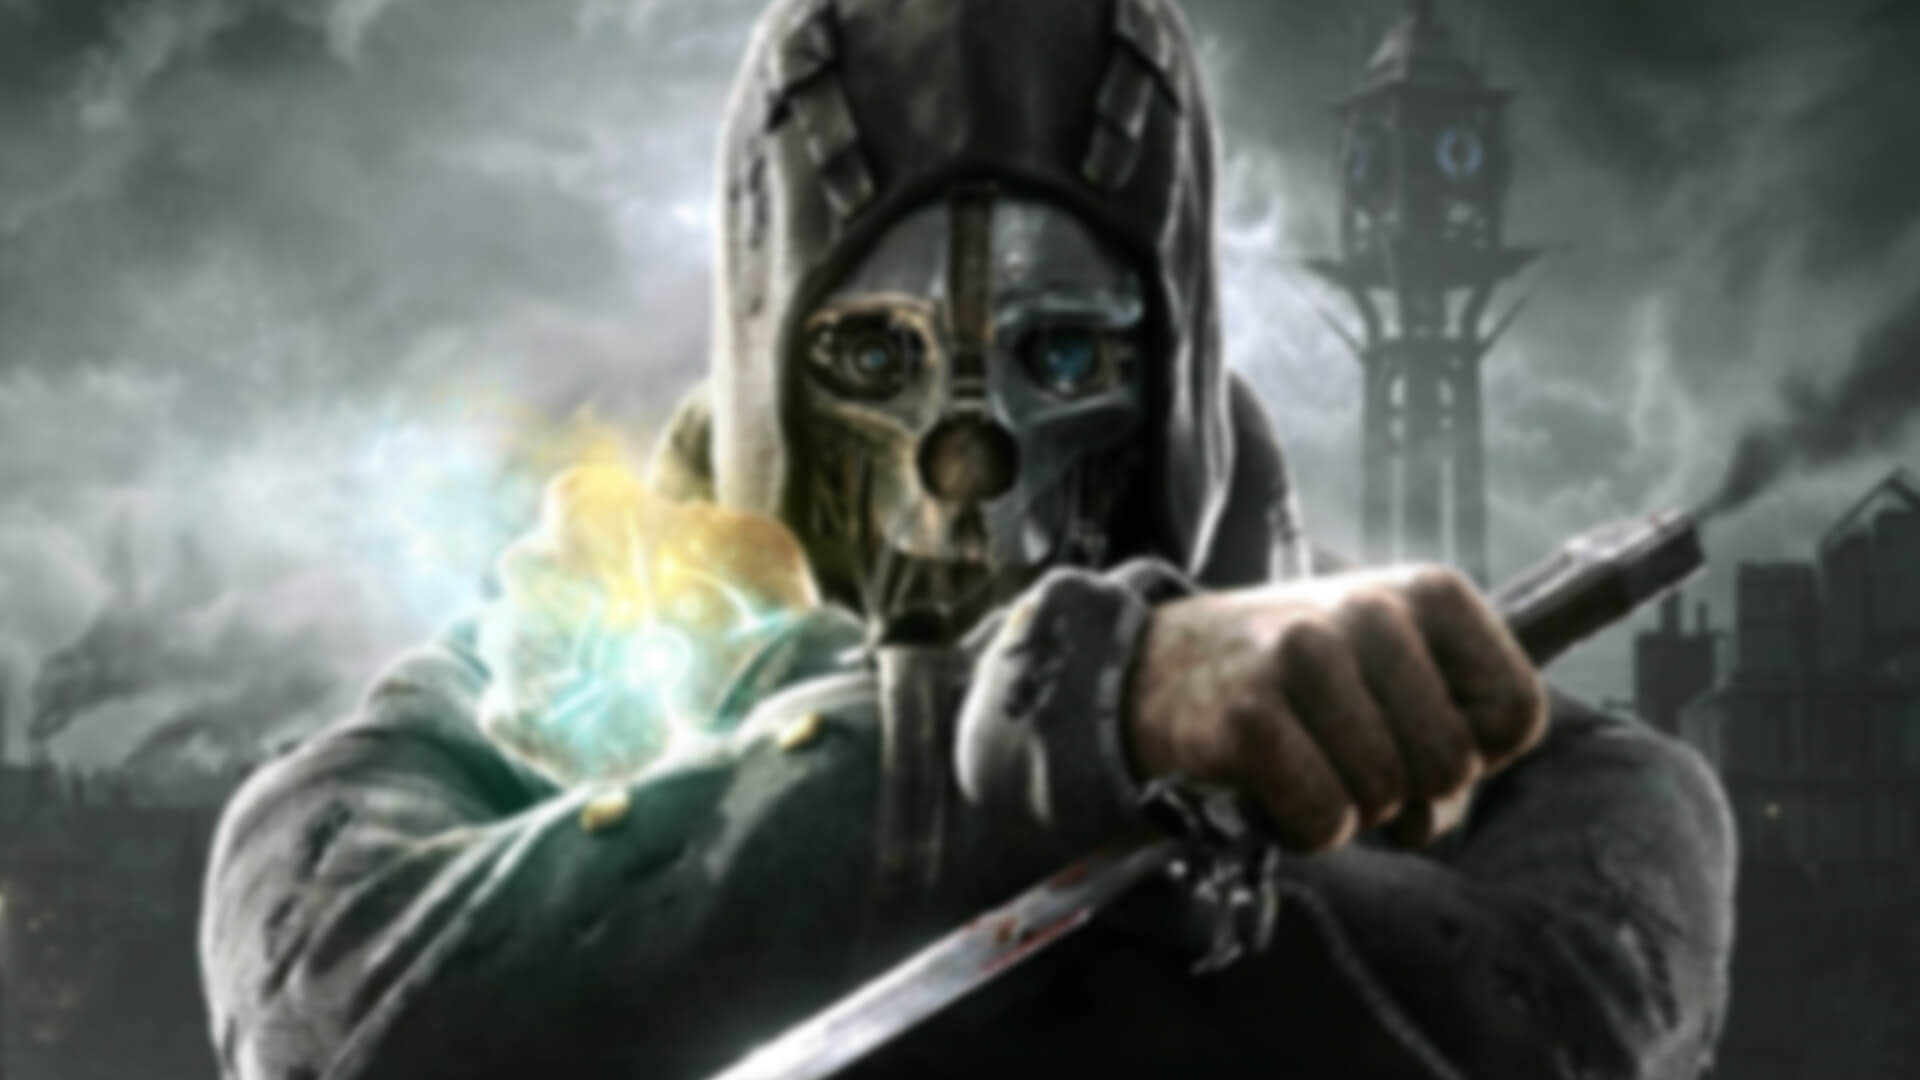 Dishonored 2 Trainer